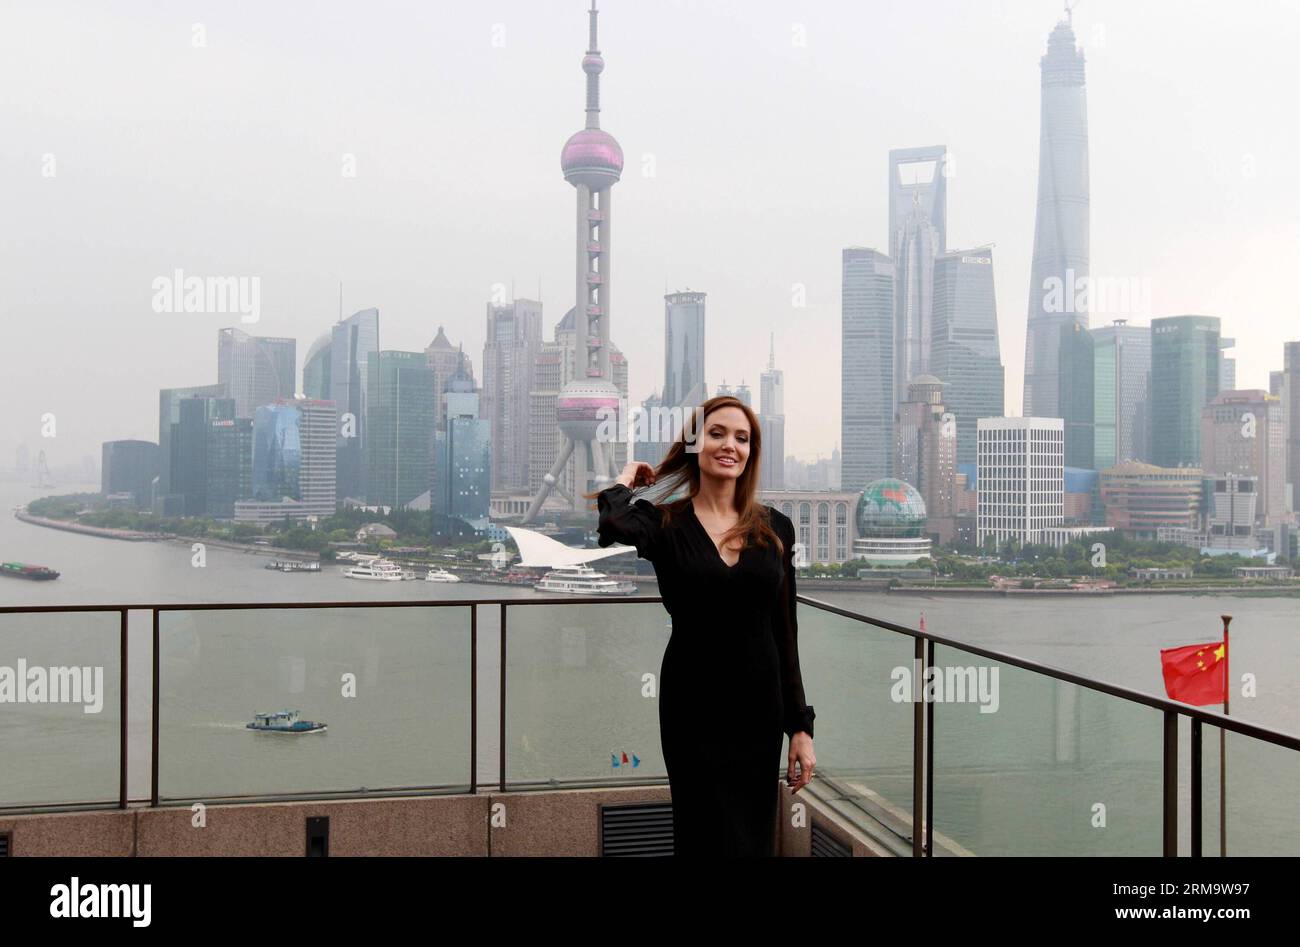 (140603) -- SHANGHAI, June 3, 2014 (Xinhua) -- American actress Angelina Jolie meets the media on the Bund in east China s Shanghai, June 3, 2014. Angelina Jolie will promote Maleficent , a fantasy adventure film she starred in, during her Shanghai visit, which is also her first time to the Chinese mainland. Maleficent will be debuted in the Chinese mainland on June 20. (Xinhua/Ren Long) (lmm) CHINA-SHANGHAI-ANGELINA JOLIE-VISIT (CN) PUBLICATIONxNOTxINxCHN   Shanghai June 3 2014 XINHUA American actress Angelina Jolie Meets The Media ON The Confederation in East China S Shanghai June 3 2014 Ang Stock Photo